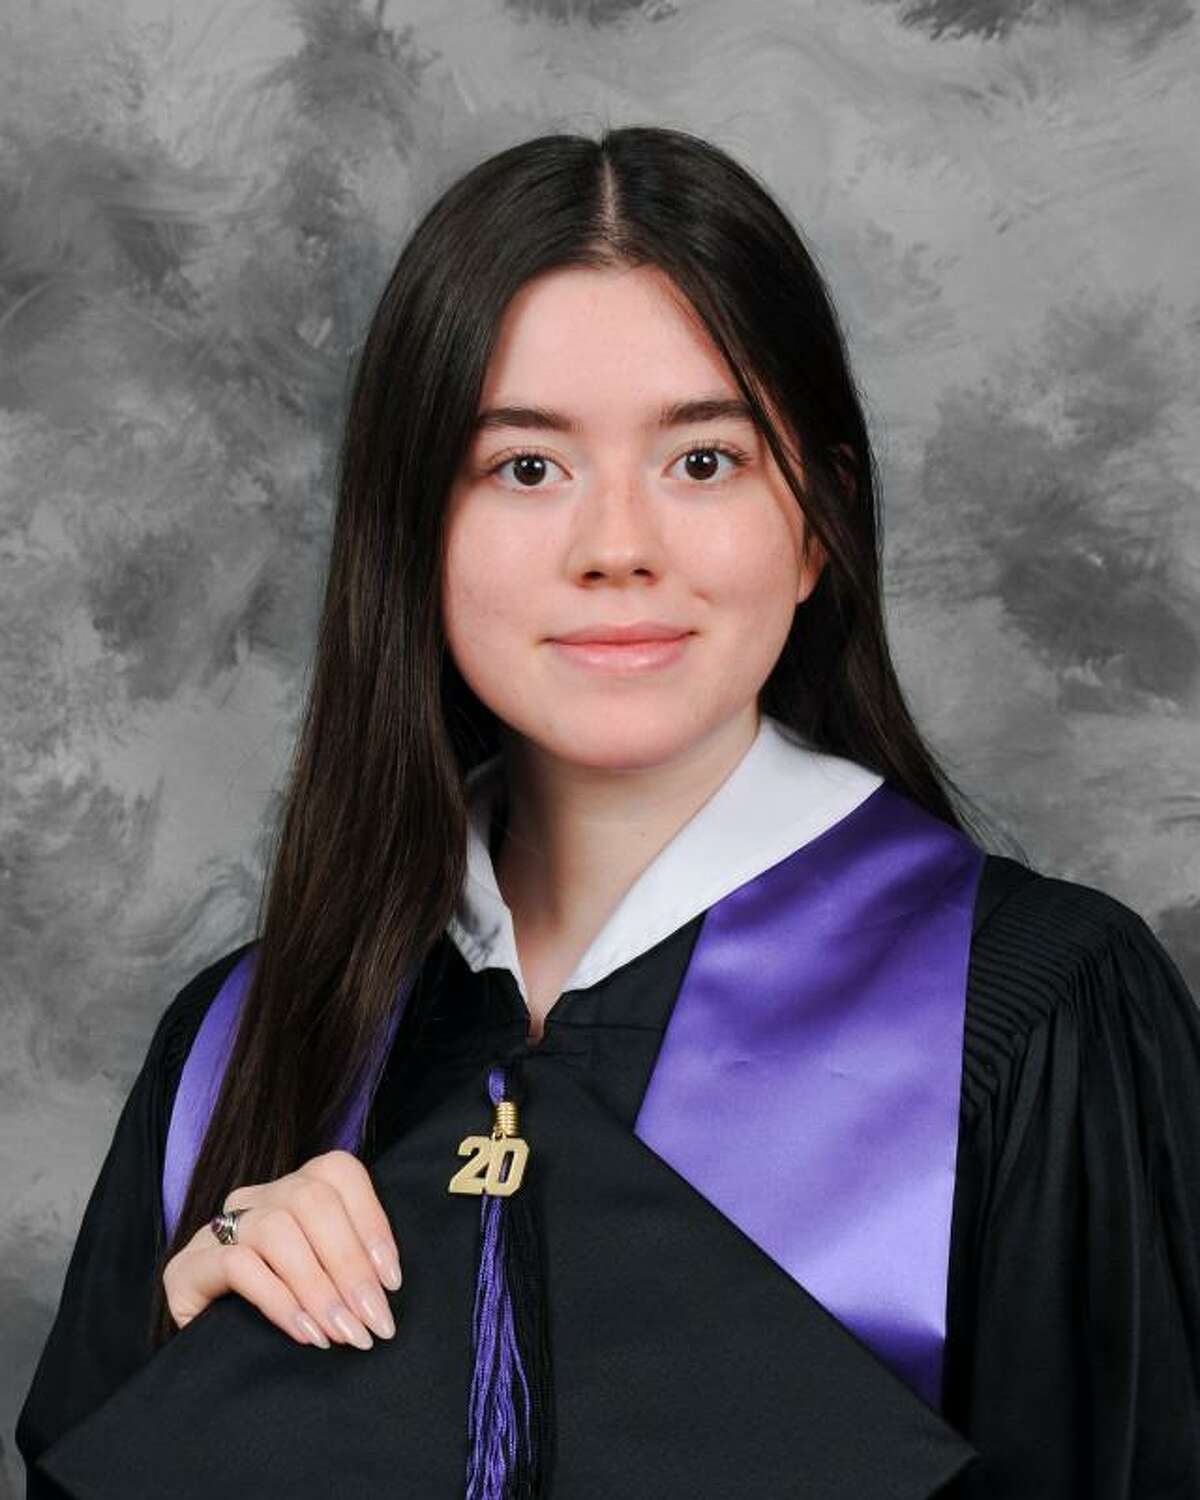 Aleida Villasana is the valedictorian for the Infinity Early College High School Class of 2020. She will attend the University of Texas and major in Architecture.